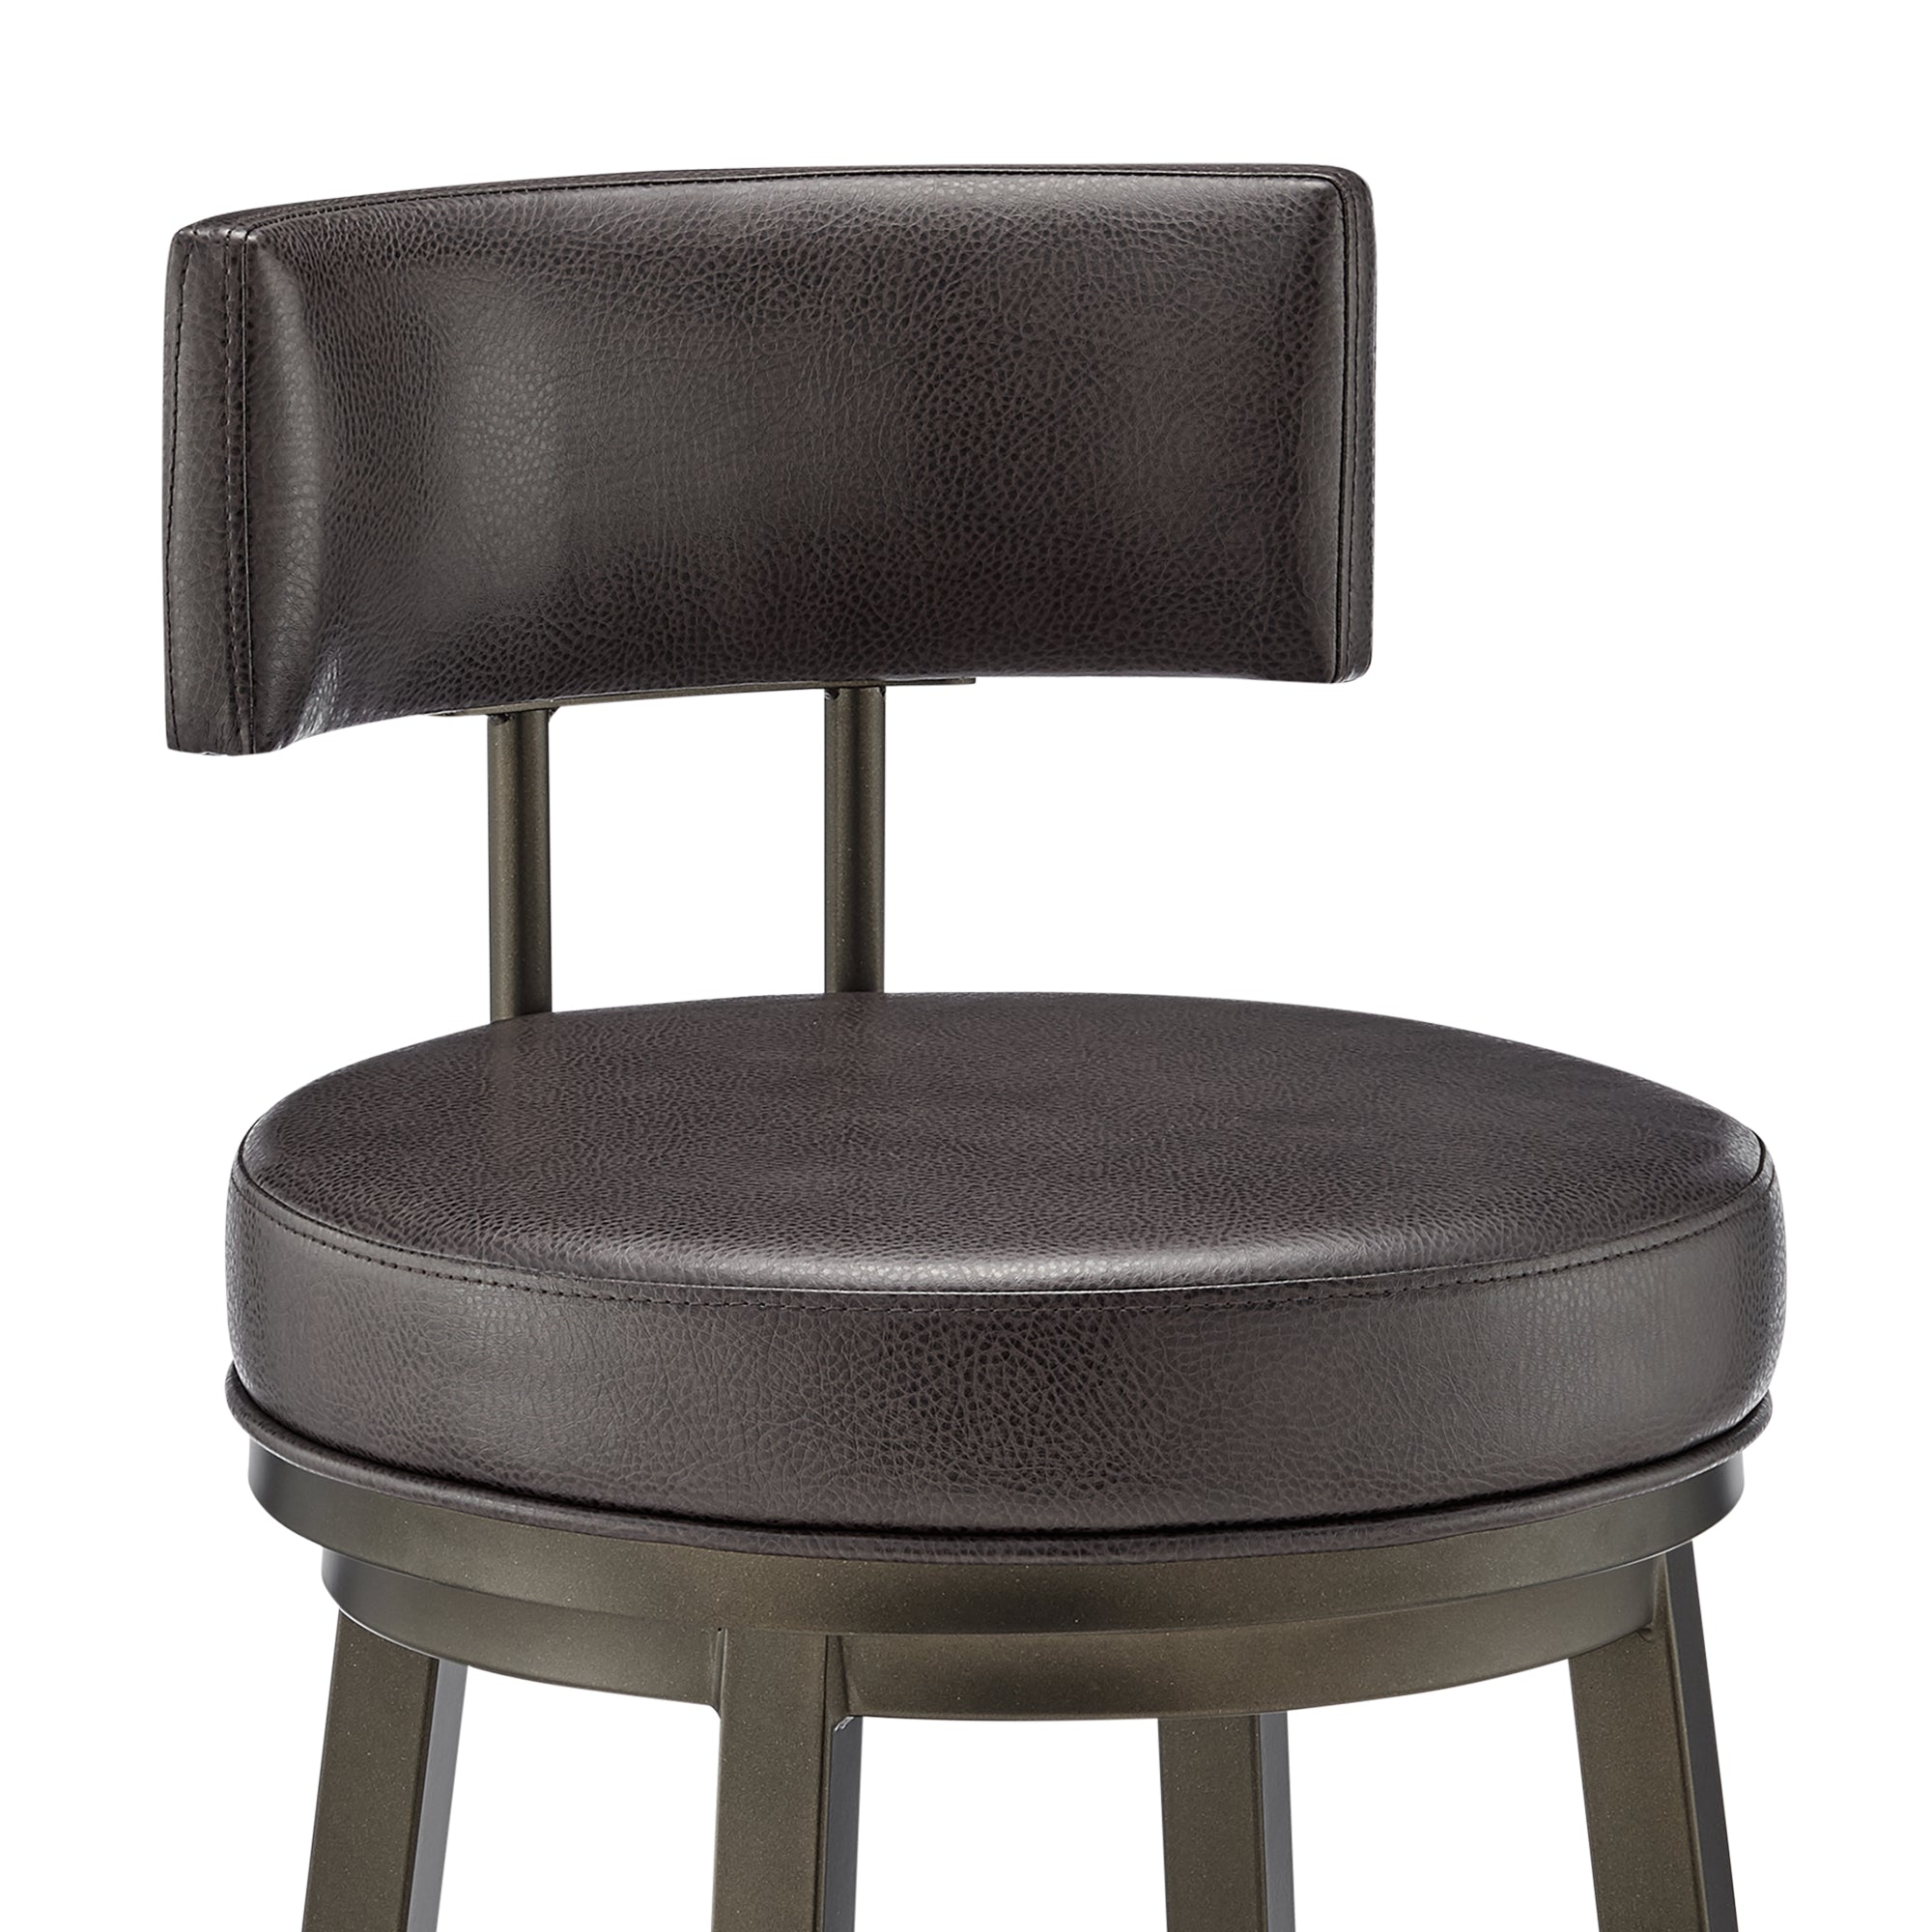 Armen Living - Dalza Swivel Counter or Bar Stool in Metal with Faux Leather - 840254333598